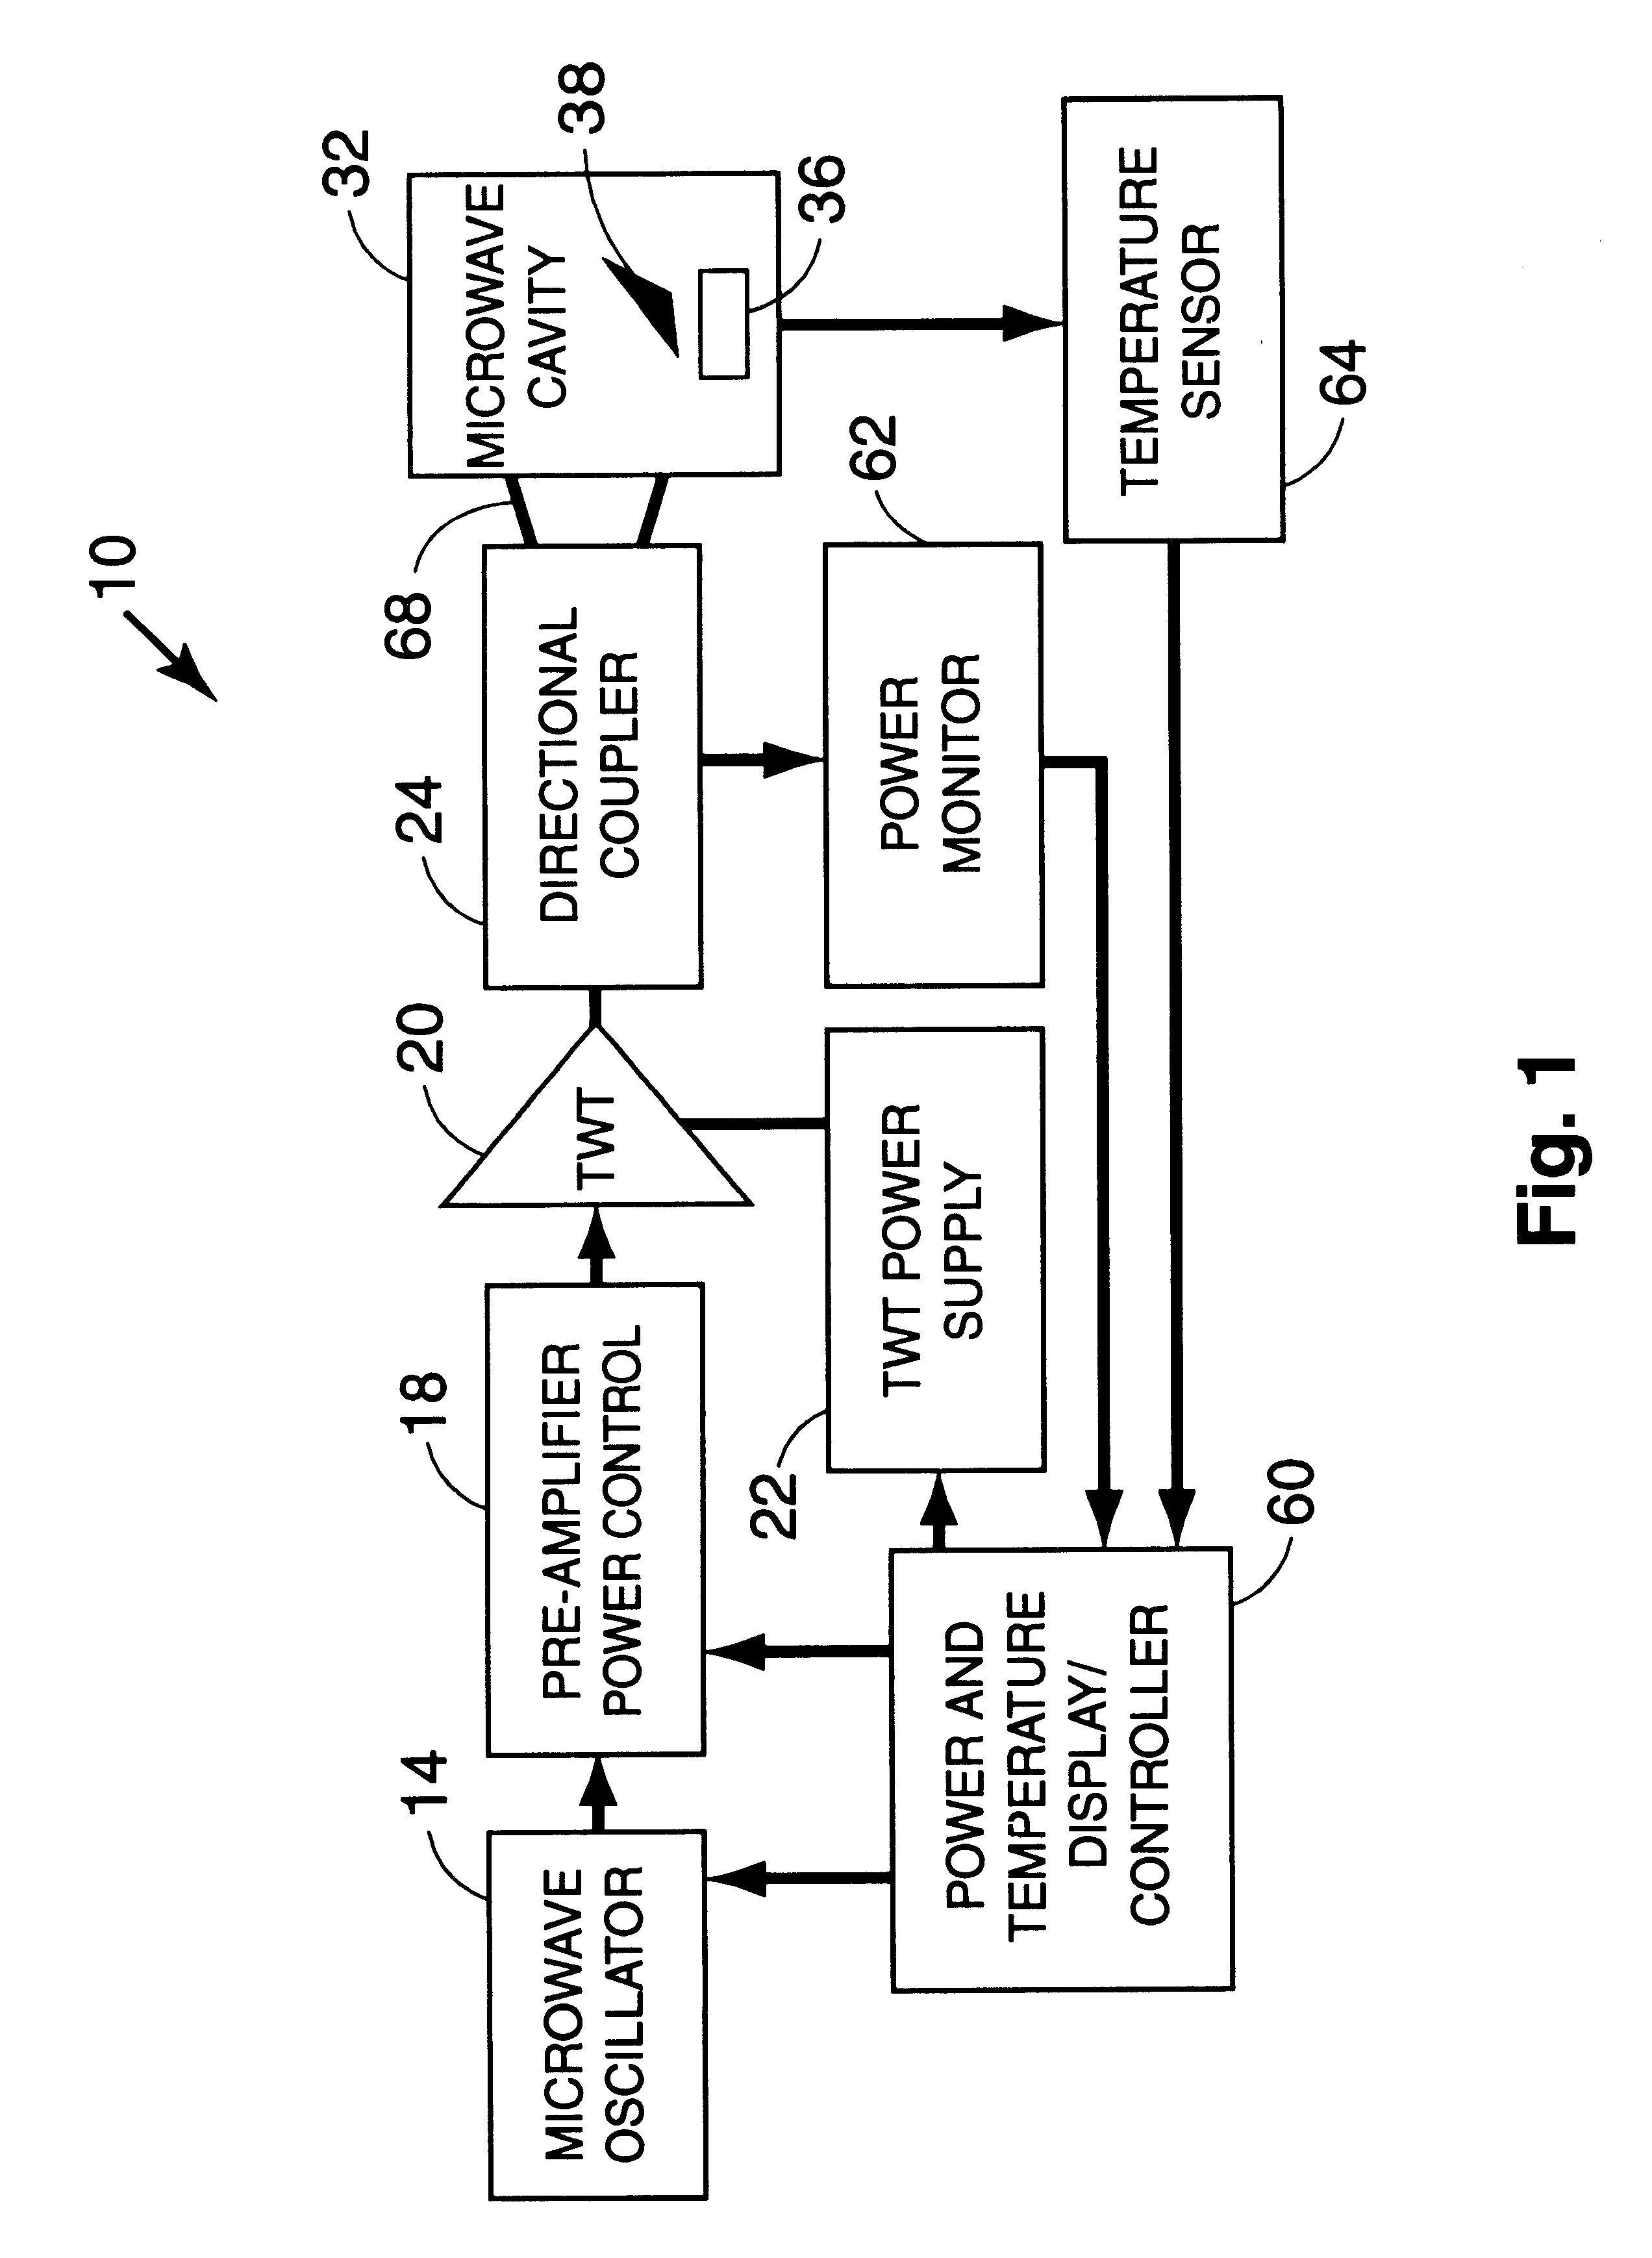 Apparatus and method for microwave processing of materials using field-perturbing tool